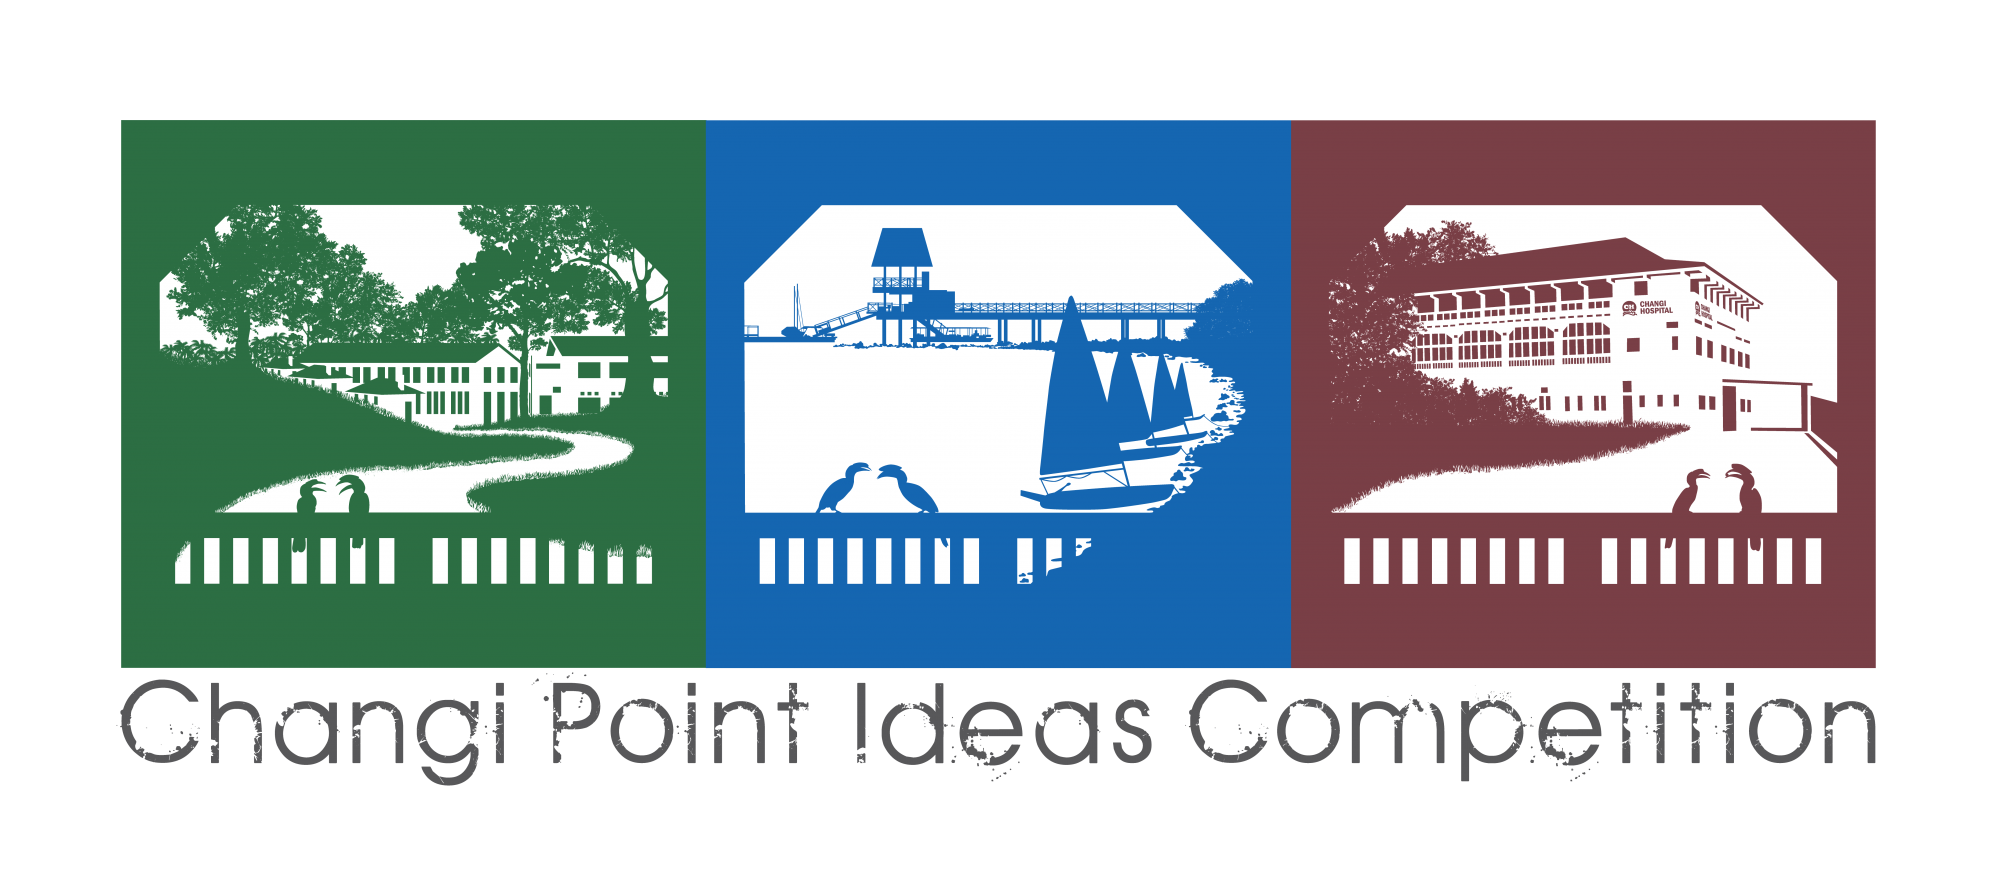 Changi Point Ideas Competition_Collage_PATH_8mar21.png